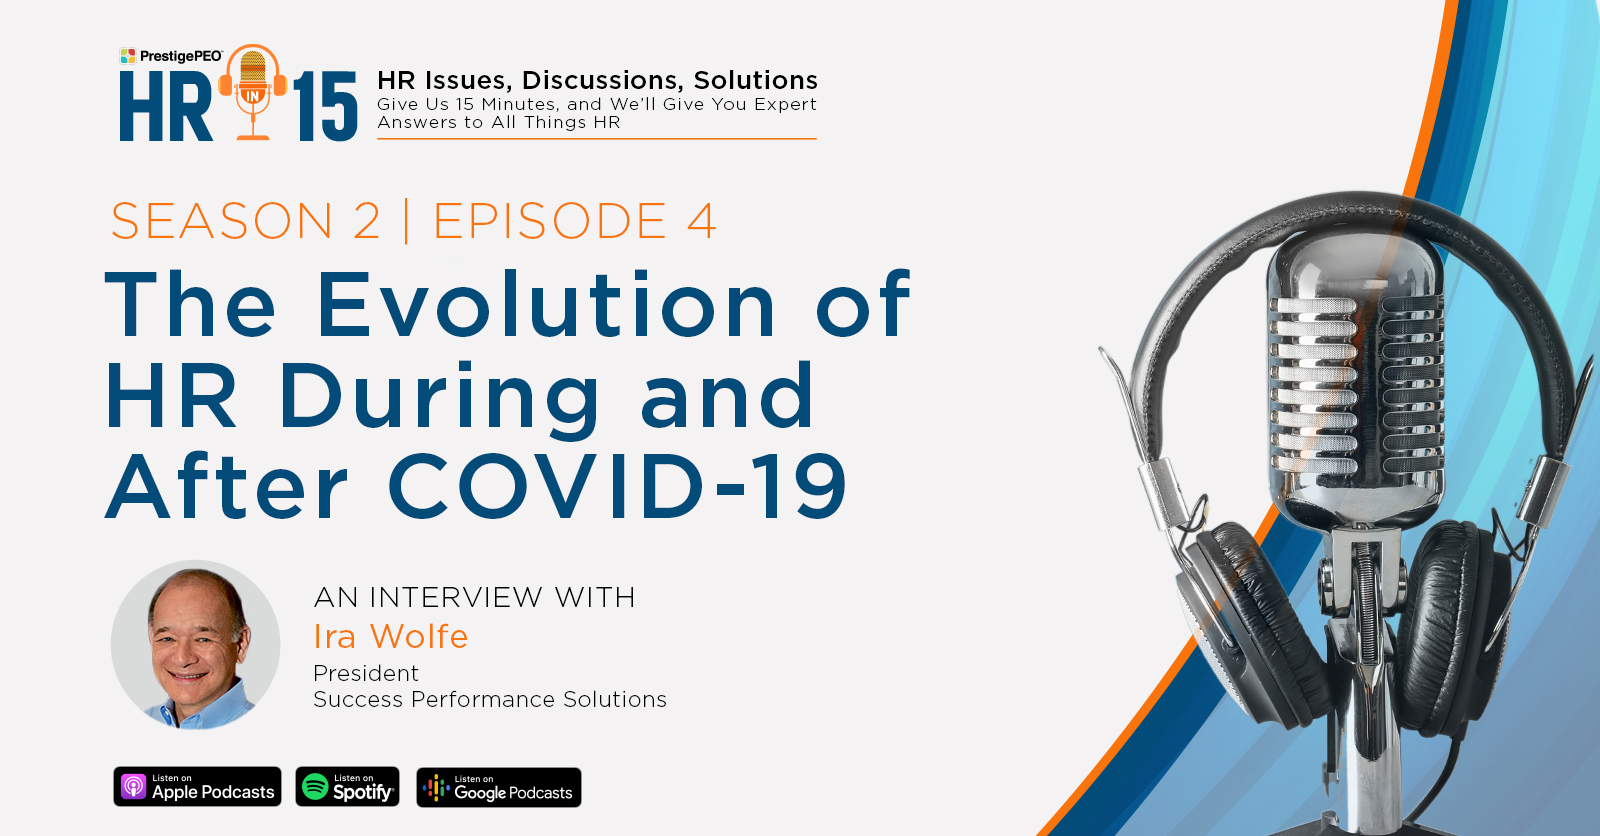 HR-in-15 Interview with Ira Wolfe: The Evolution of HR During and After COVID-19